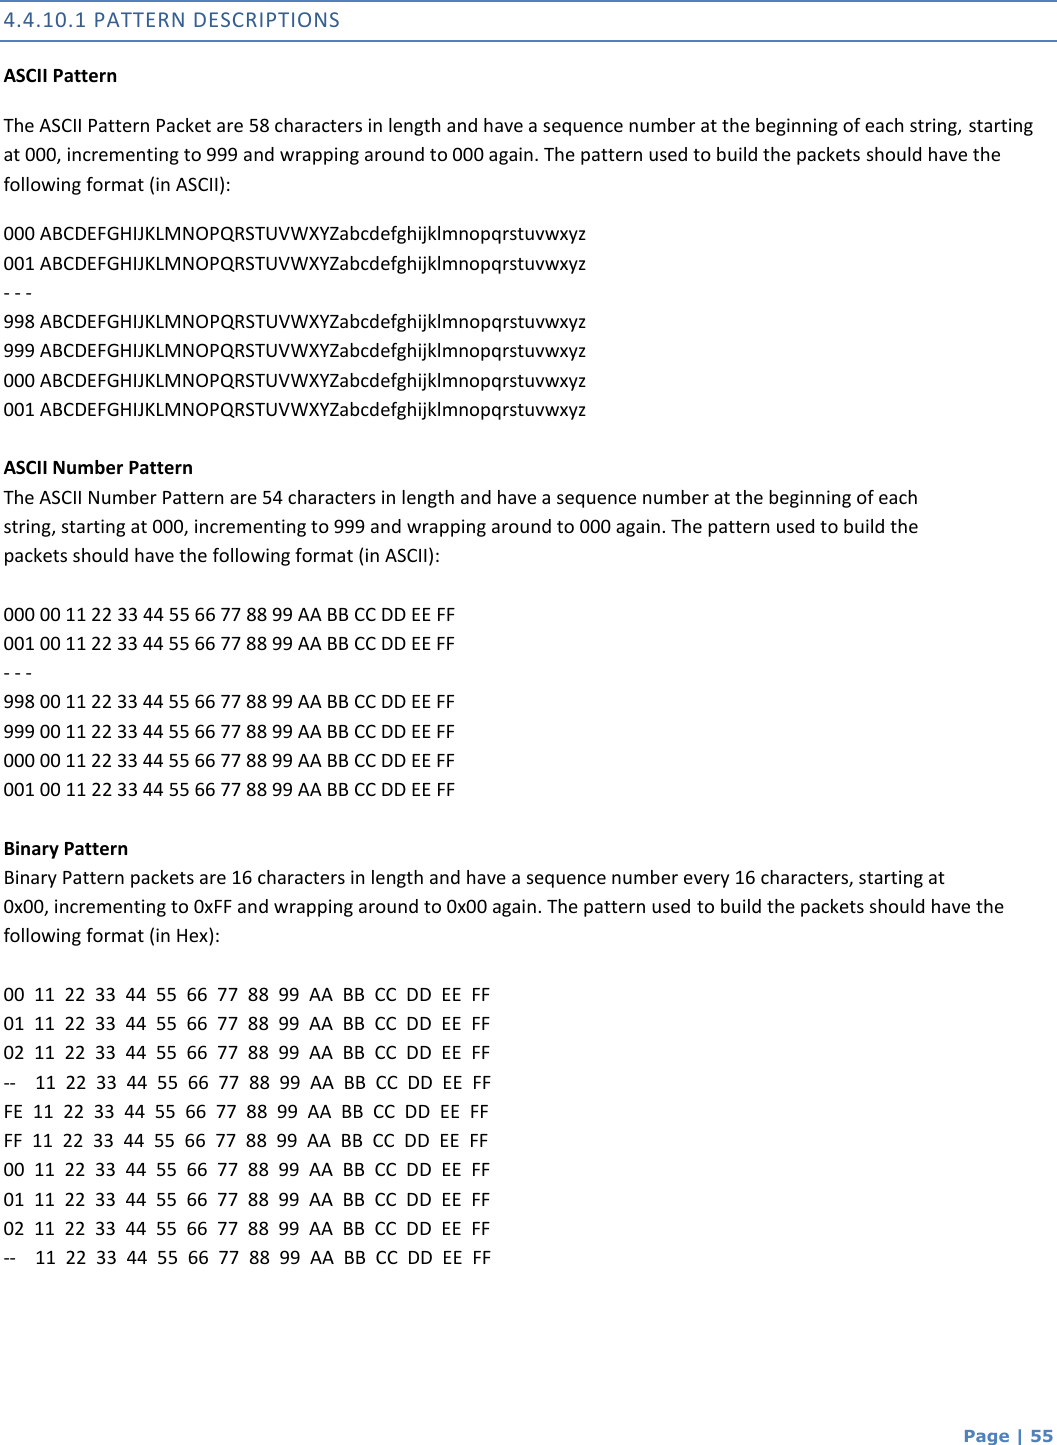  Page | 55 4.4.10.1 PATTERN DESCRIPTIONS ASCII Pattern The ASCII Pattern Packet are 58 characters in length and have a sequence number at the beginning of each string, starting at 000, incrementing to 999 and wrapping around to 000 again. The pattern used to build the packets should have the following format (in ASCII): 000 ABCDEFGHIJKLMNOPQRSTUVWXYZabcdefghijklmnopqrstuvwxyz 001 ABCDEFGHIJKLMNOPQRSTUVWXYZabcdefghijklmnopqrstuvwxyz - - - 998 ABCDEFGHIJKLMNOPQRSTUVWXYZabcdefghijklmnopqrstuvwxyz 999 ABCDEFGHIJKLMNOPQRSTUVWXYZabcdefghijklmnopqrstuvwxyz 000 ABCDEFGHIJKLMNOPQRSTUVWXYZabcdefghijklmnopqrstuvwxyz 001 ABCDEFGHIJKLMNOPQRSTUVWXYZabcdefghijklmnopqrstuvwxyz  ASCII Number Pattern The ASCII Number Pattern are 54 characters in length and have a sequence number at the beginning of each string, starting at 000, incrementing to 999 and wrapping around to 000 again. The pattern used to build the packets should have the following format (in ASCII):  000 00 11 22 33 44 55 66 77 88 99 AA BB CC DD EE FF 001 00 11 22 33 44 55 66 77 88 99 AA BB CC DD EE FF - - - 998 00 11 22 33 44 55 66 77 88 99 AA BB CC DD EE FF 999 00 11 22 33 44 55 66 77 88 99 AA BB CC DD EE FF 000 00 11 22 33 44 55 66 77 88 99 AA BB CC DD EE FF 001 00 11 22 33 44 55 66 77 88 99 AA BB CC DD EE FF  Binary Pattern Binary Pattern packets are 16 characters in length and have a sequence number every 16 characters, starting at 0x00, incrementing to 0xFF and wrapping around to 0x00 again. The pattern used to build the packets should have the following format (in Hex):  00  11  22  33  44  55  66  77  88  99  AA  BB  CC  DD  EE  FF 01  11  22  33  44  55  66  77  88  99  AA  BB  CC  DD  EE  FF 02  11  22  33  44  55  66  77  88  99  AA  BB  CC  DD  EE  FF --    11  22  33  44  55  66  77  88  99  AA  BB  CC  DD  EE  FF FE  11  22  33  44  55  66  77  88  99  AA  BB  CC  DD  EE  FF FF  11  22  33  44  55  66  77  88  99  AA  BB  CC  DD  EE  FF 00  11  22  33  44  55  66  77  88  99  AA  BB  CC  DD  EE  FF 01  11  22  33  44  55  66  77  88  99  AA  BB  CC  DD  EE  FF 02  11  22  33  44  55  66  77  88  99  AA  BB  CC  DD  EE  FF --    11  22  33  44  55  66  77  88  99  AA  BB  CC  DD  EE  FF   